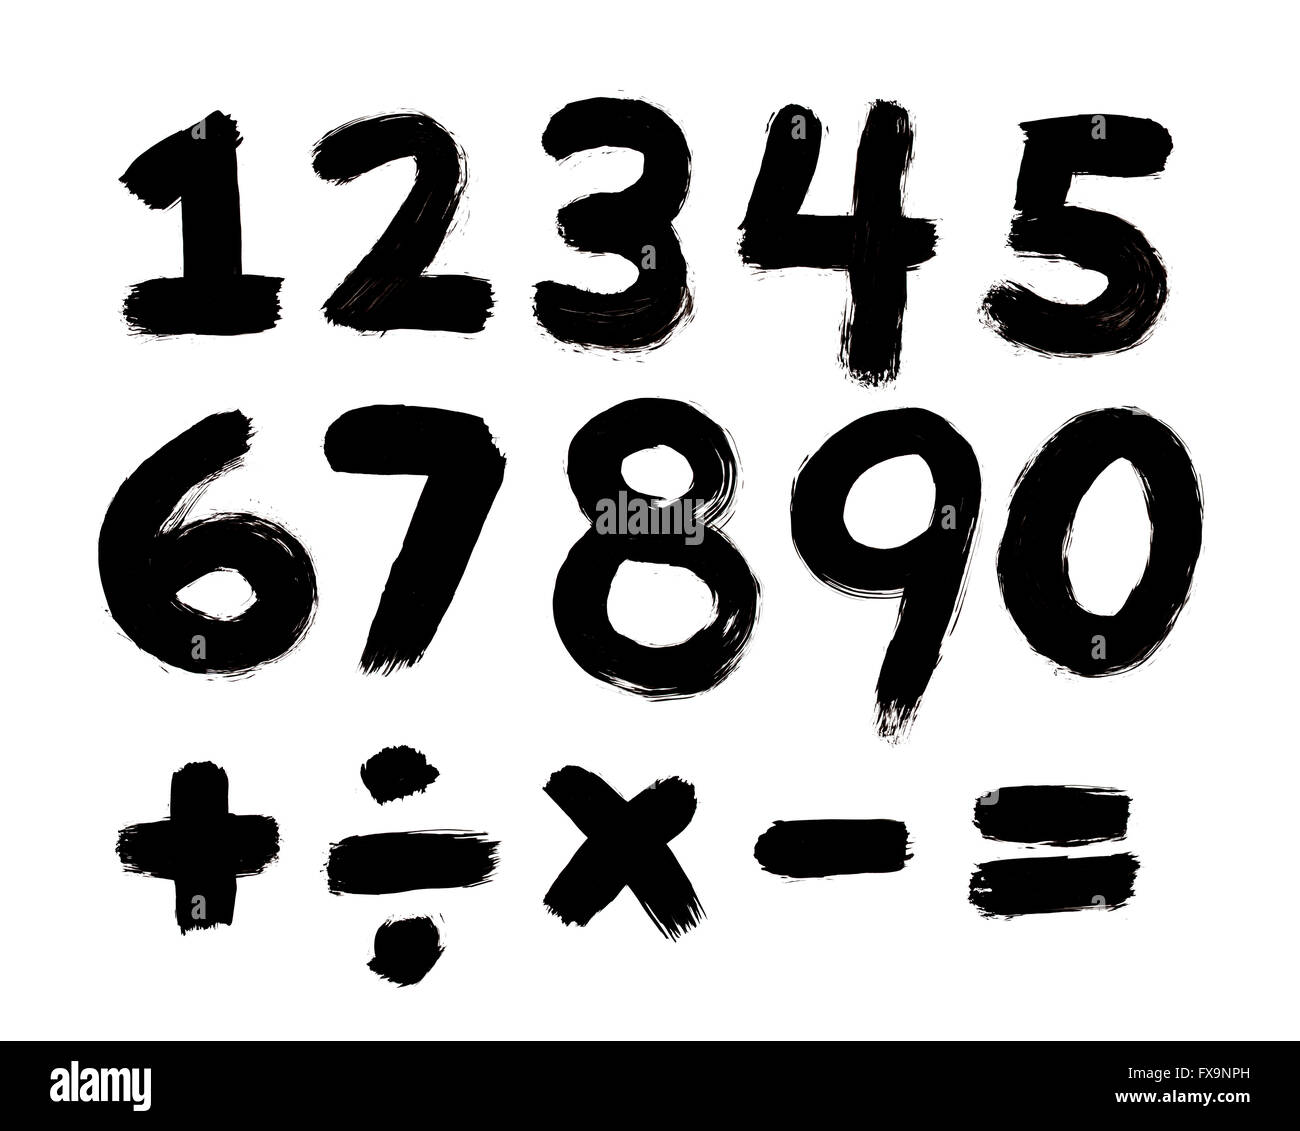 Black Painted Brushed Numbers Isolated on White Background. Stock Photo